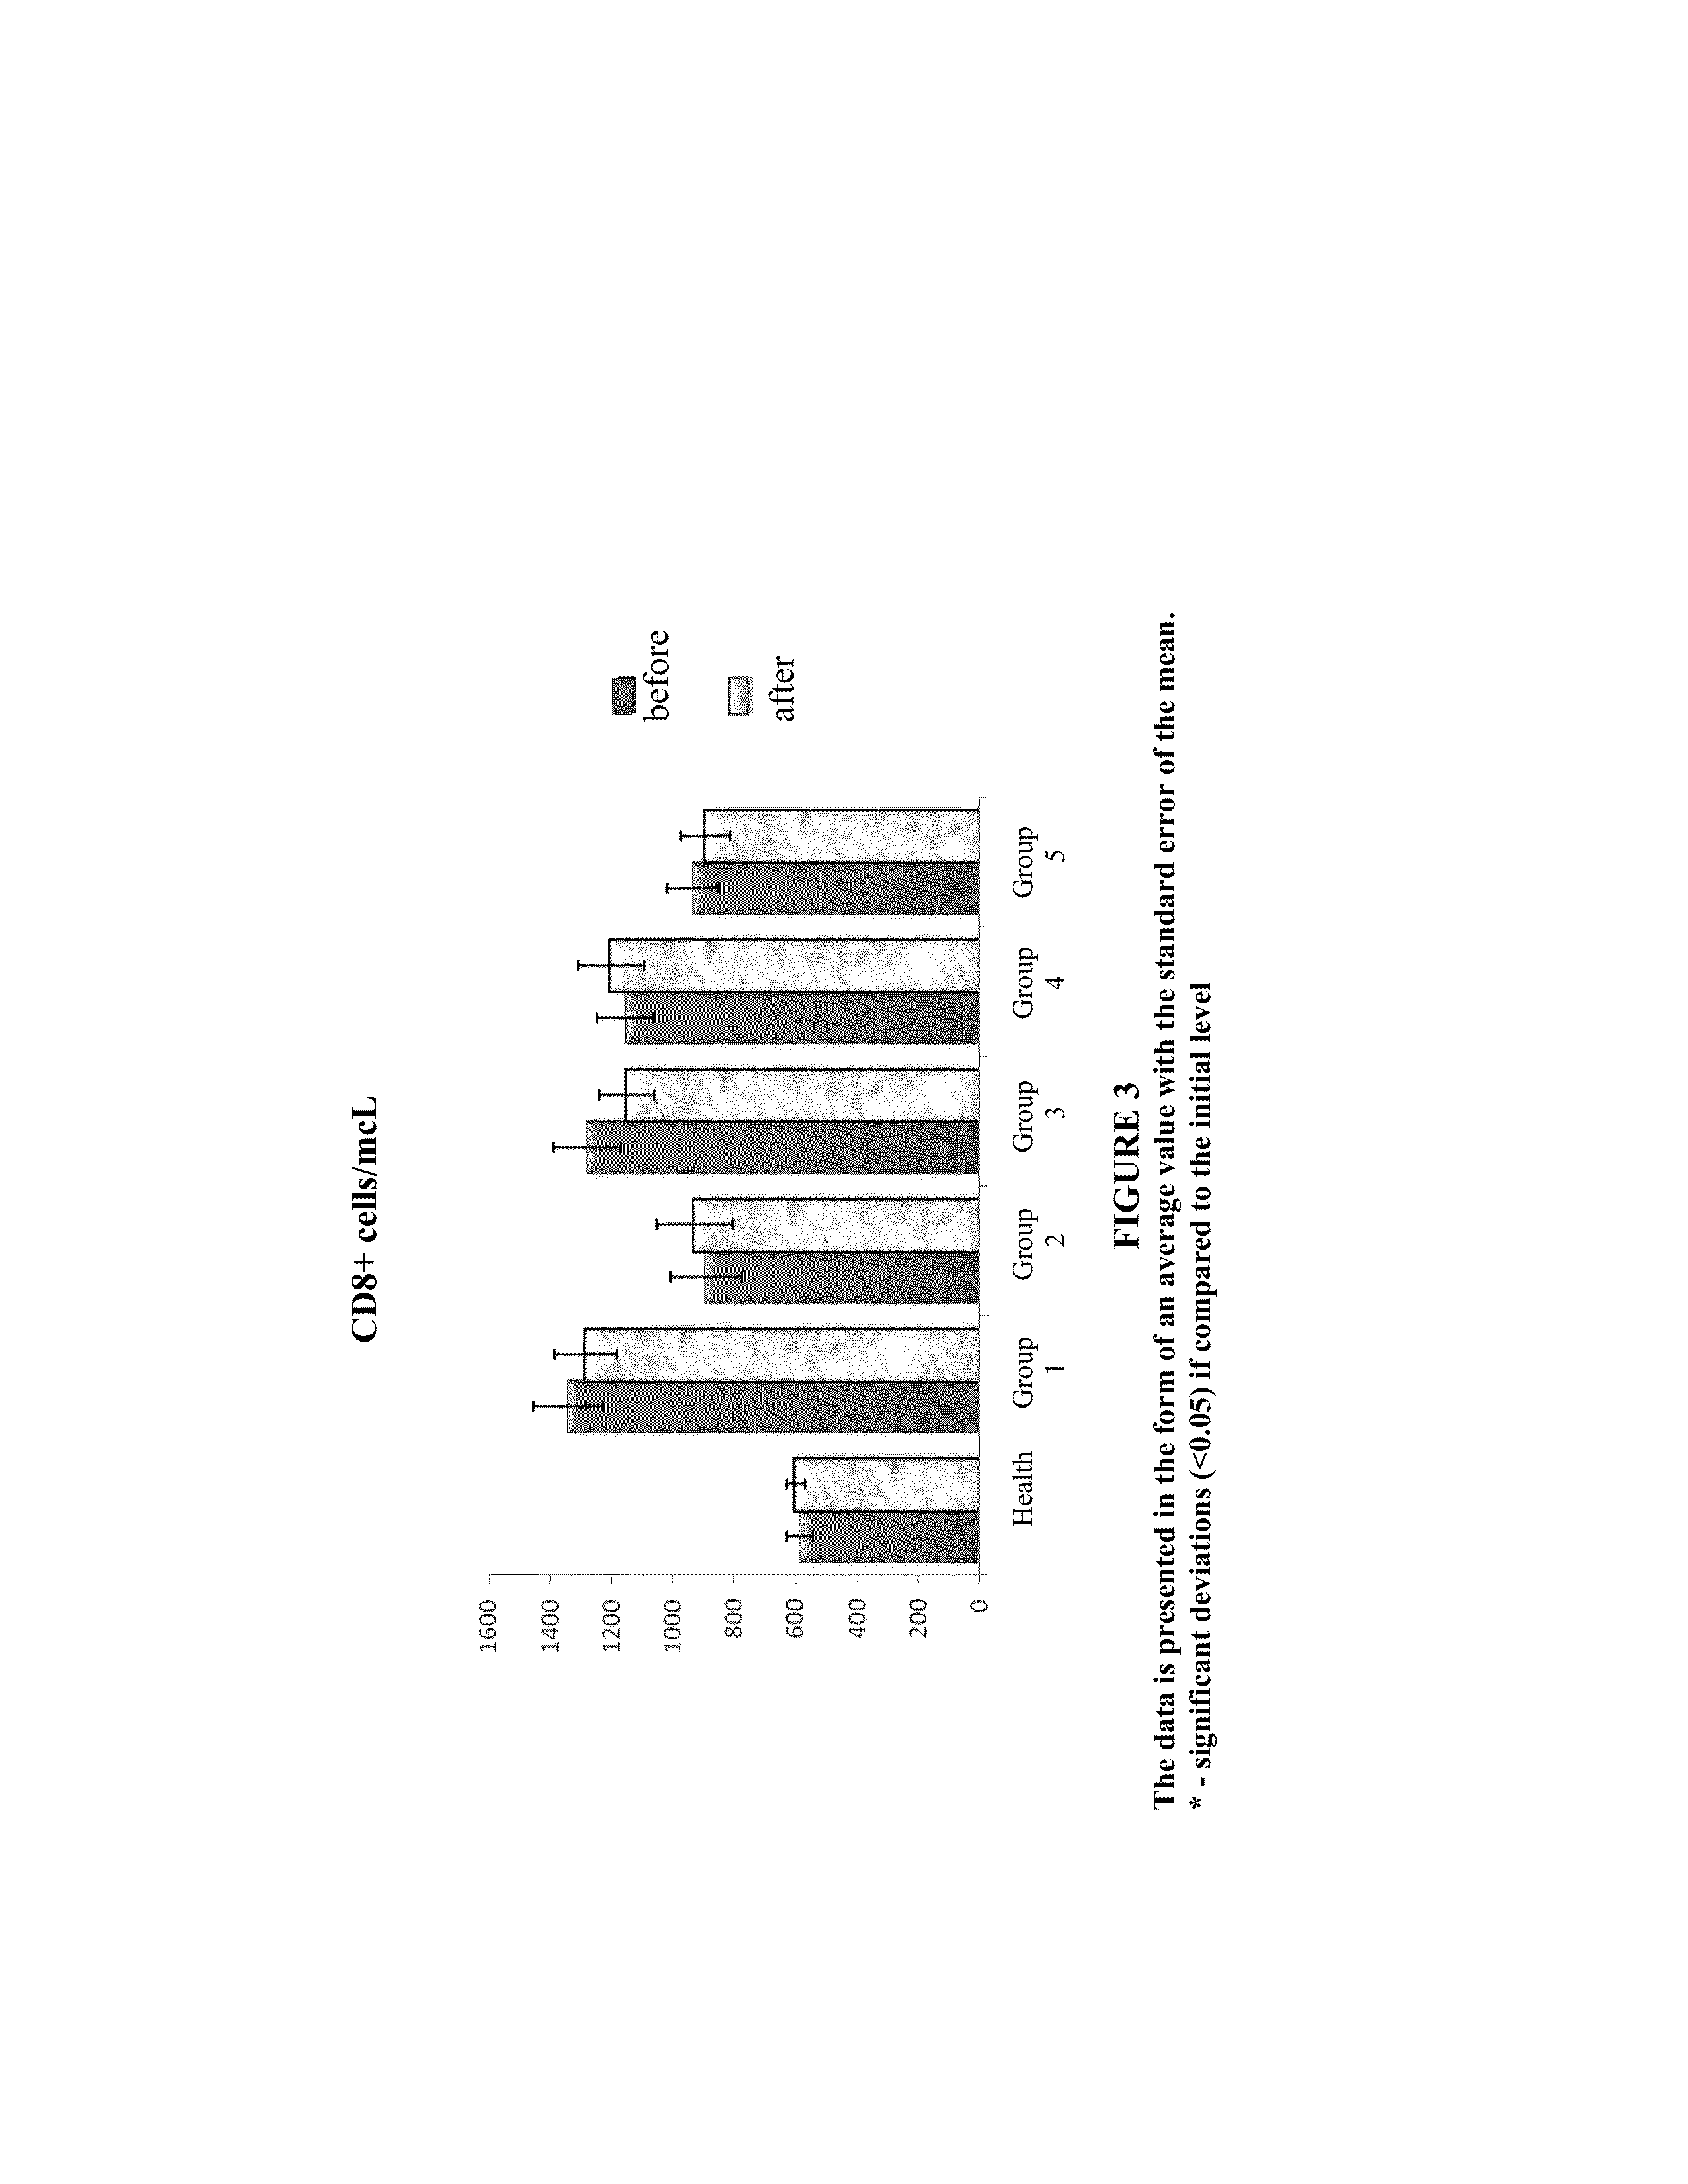 Method and composition for the treatment of diseases caused by or associated with HIV